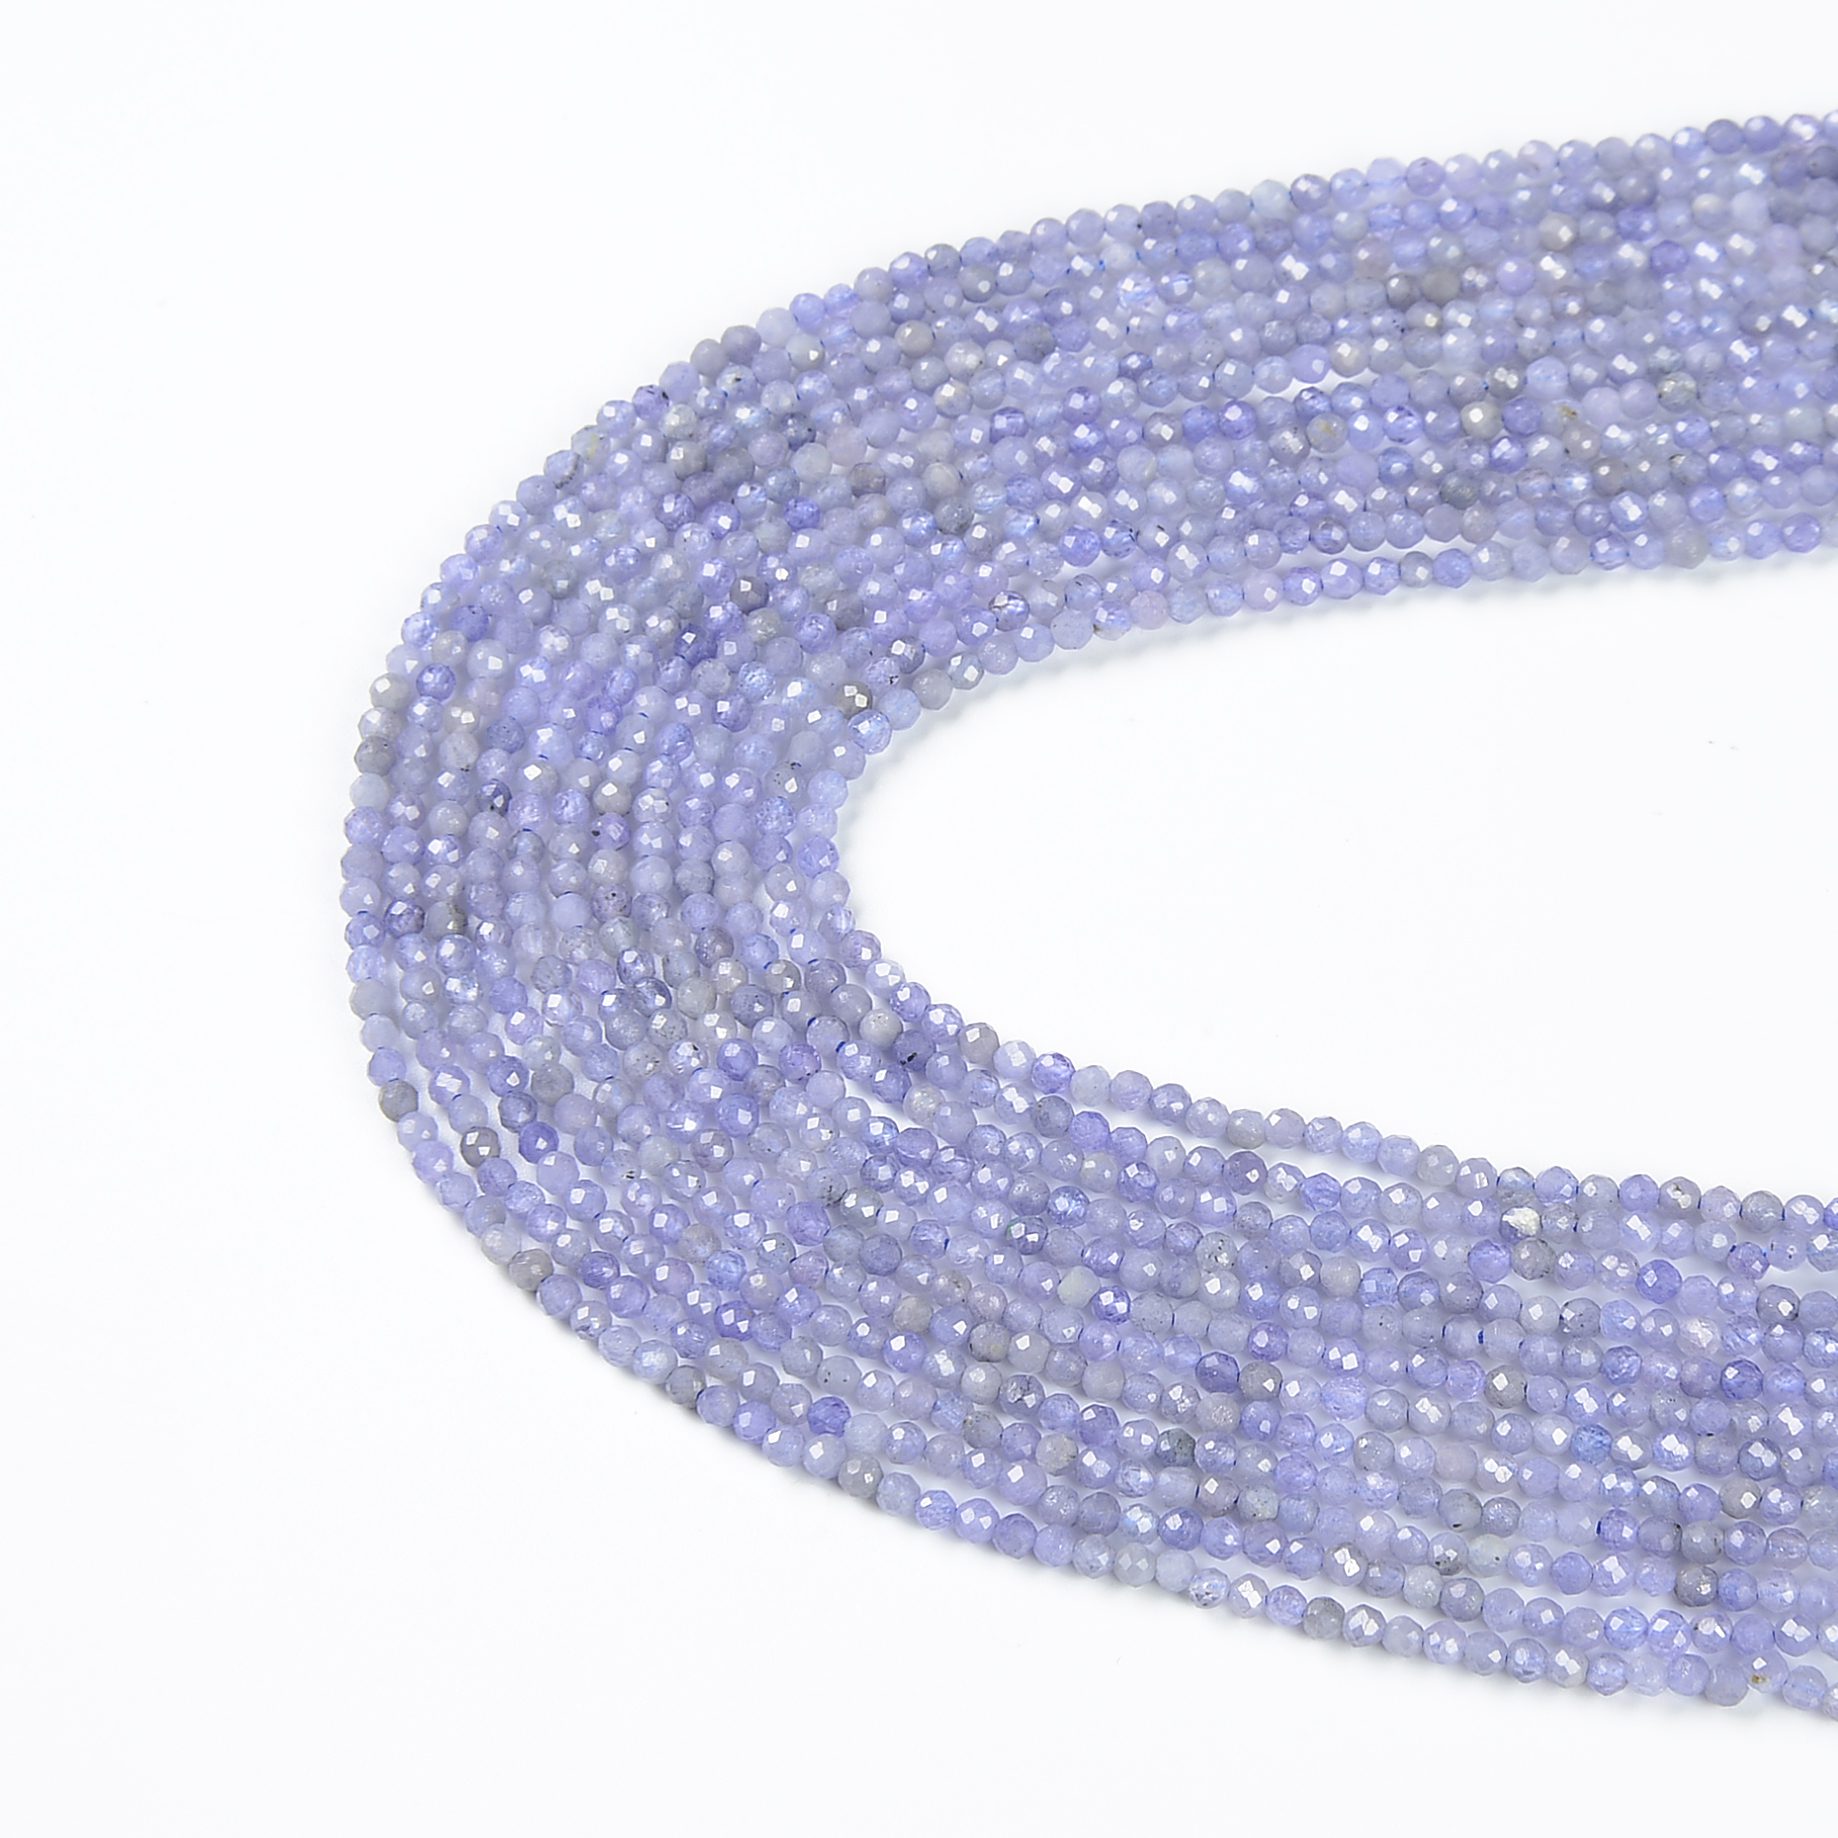 Natural Tanzanite Semi Precious Gemstone Faceted Loose Beads 13inch Strand Tanzanite Gemstone 2mm-3mm Rondelle Micro Faceted Beads AAA